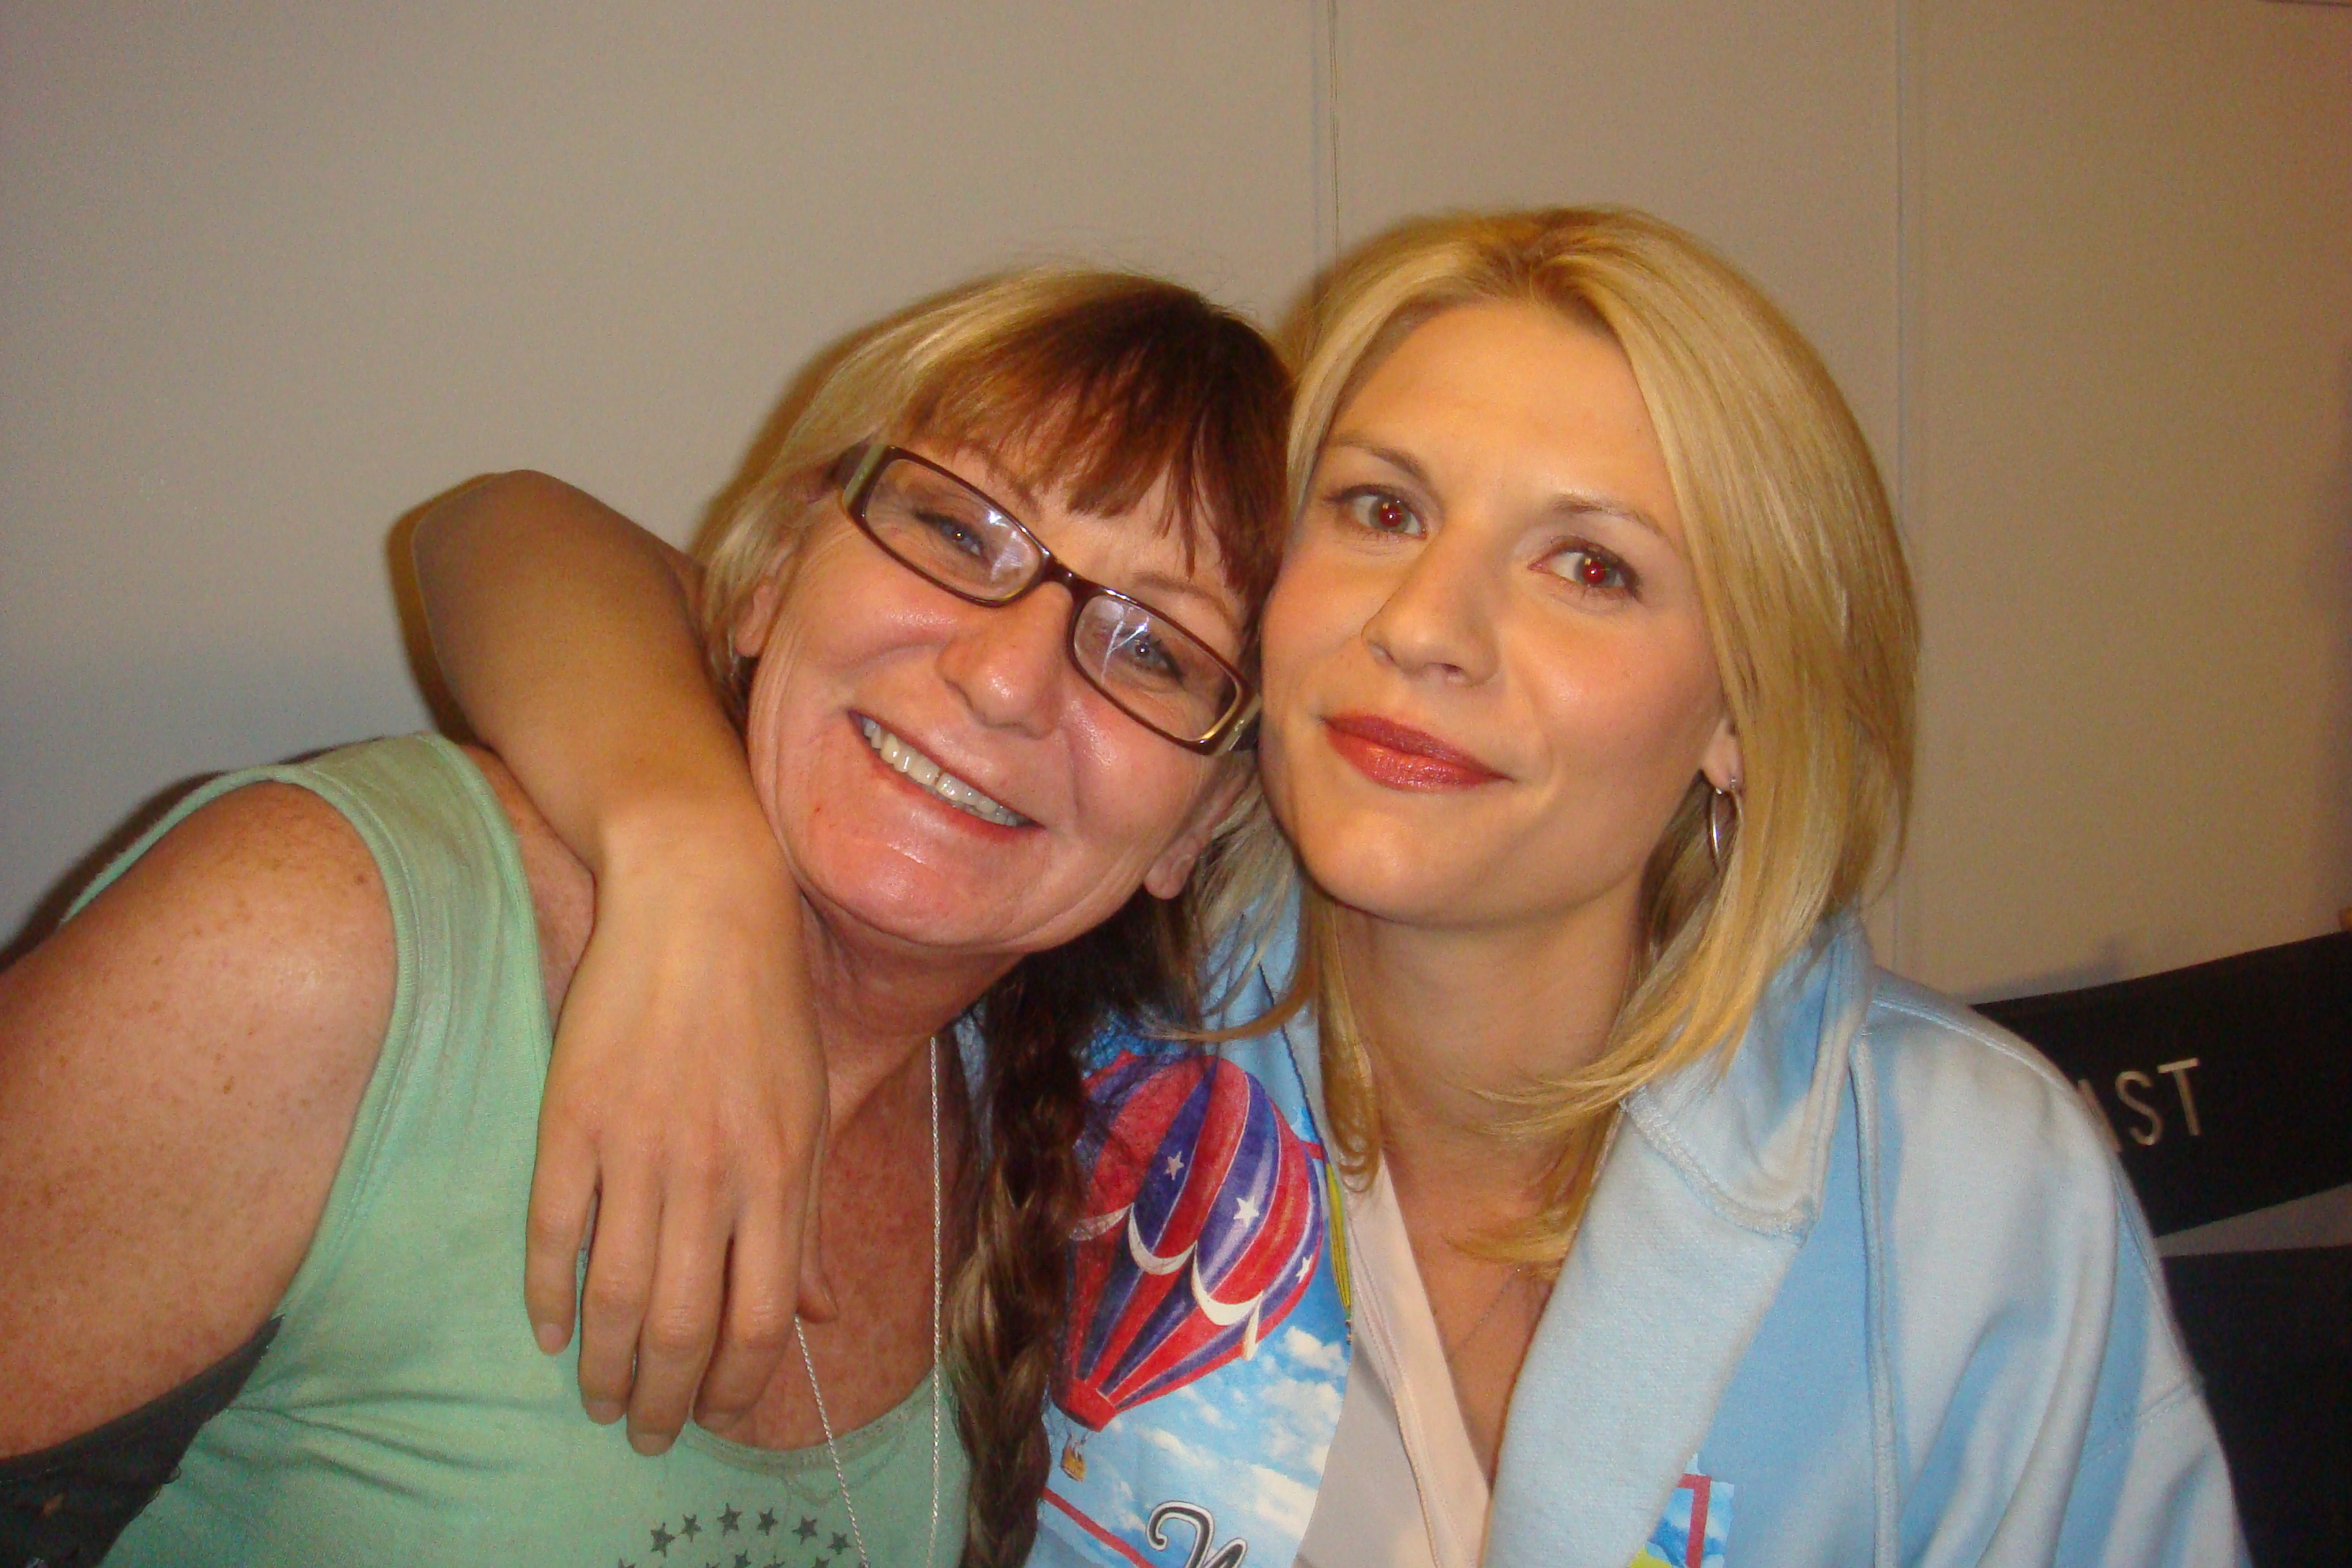 RAMONA AND CLAIRE DANES! ALBUQUERQUE SPRING 2011.LOVE ME SOME CLAIRE...OUR 2ND FILM TOGETHER...